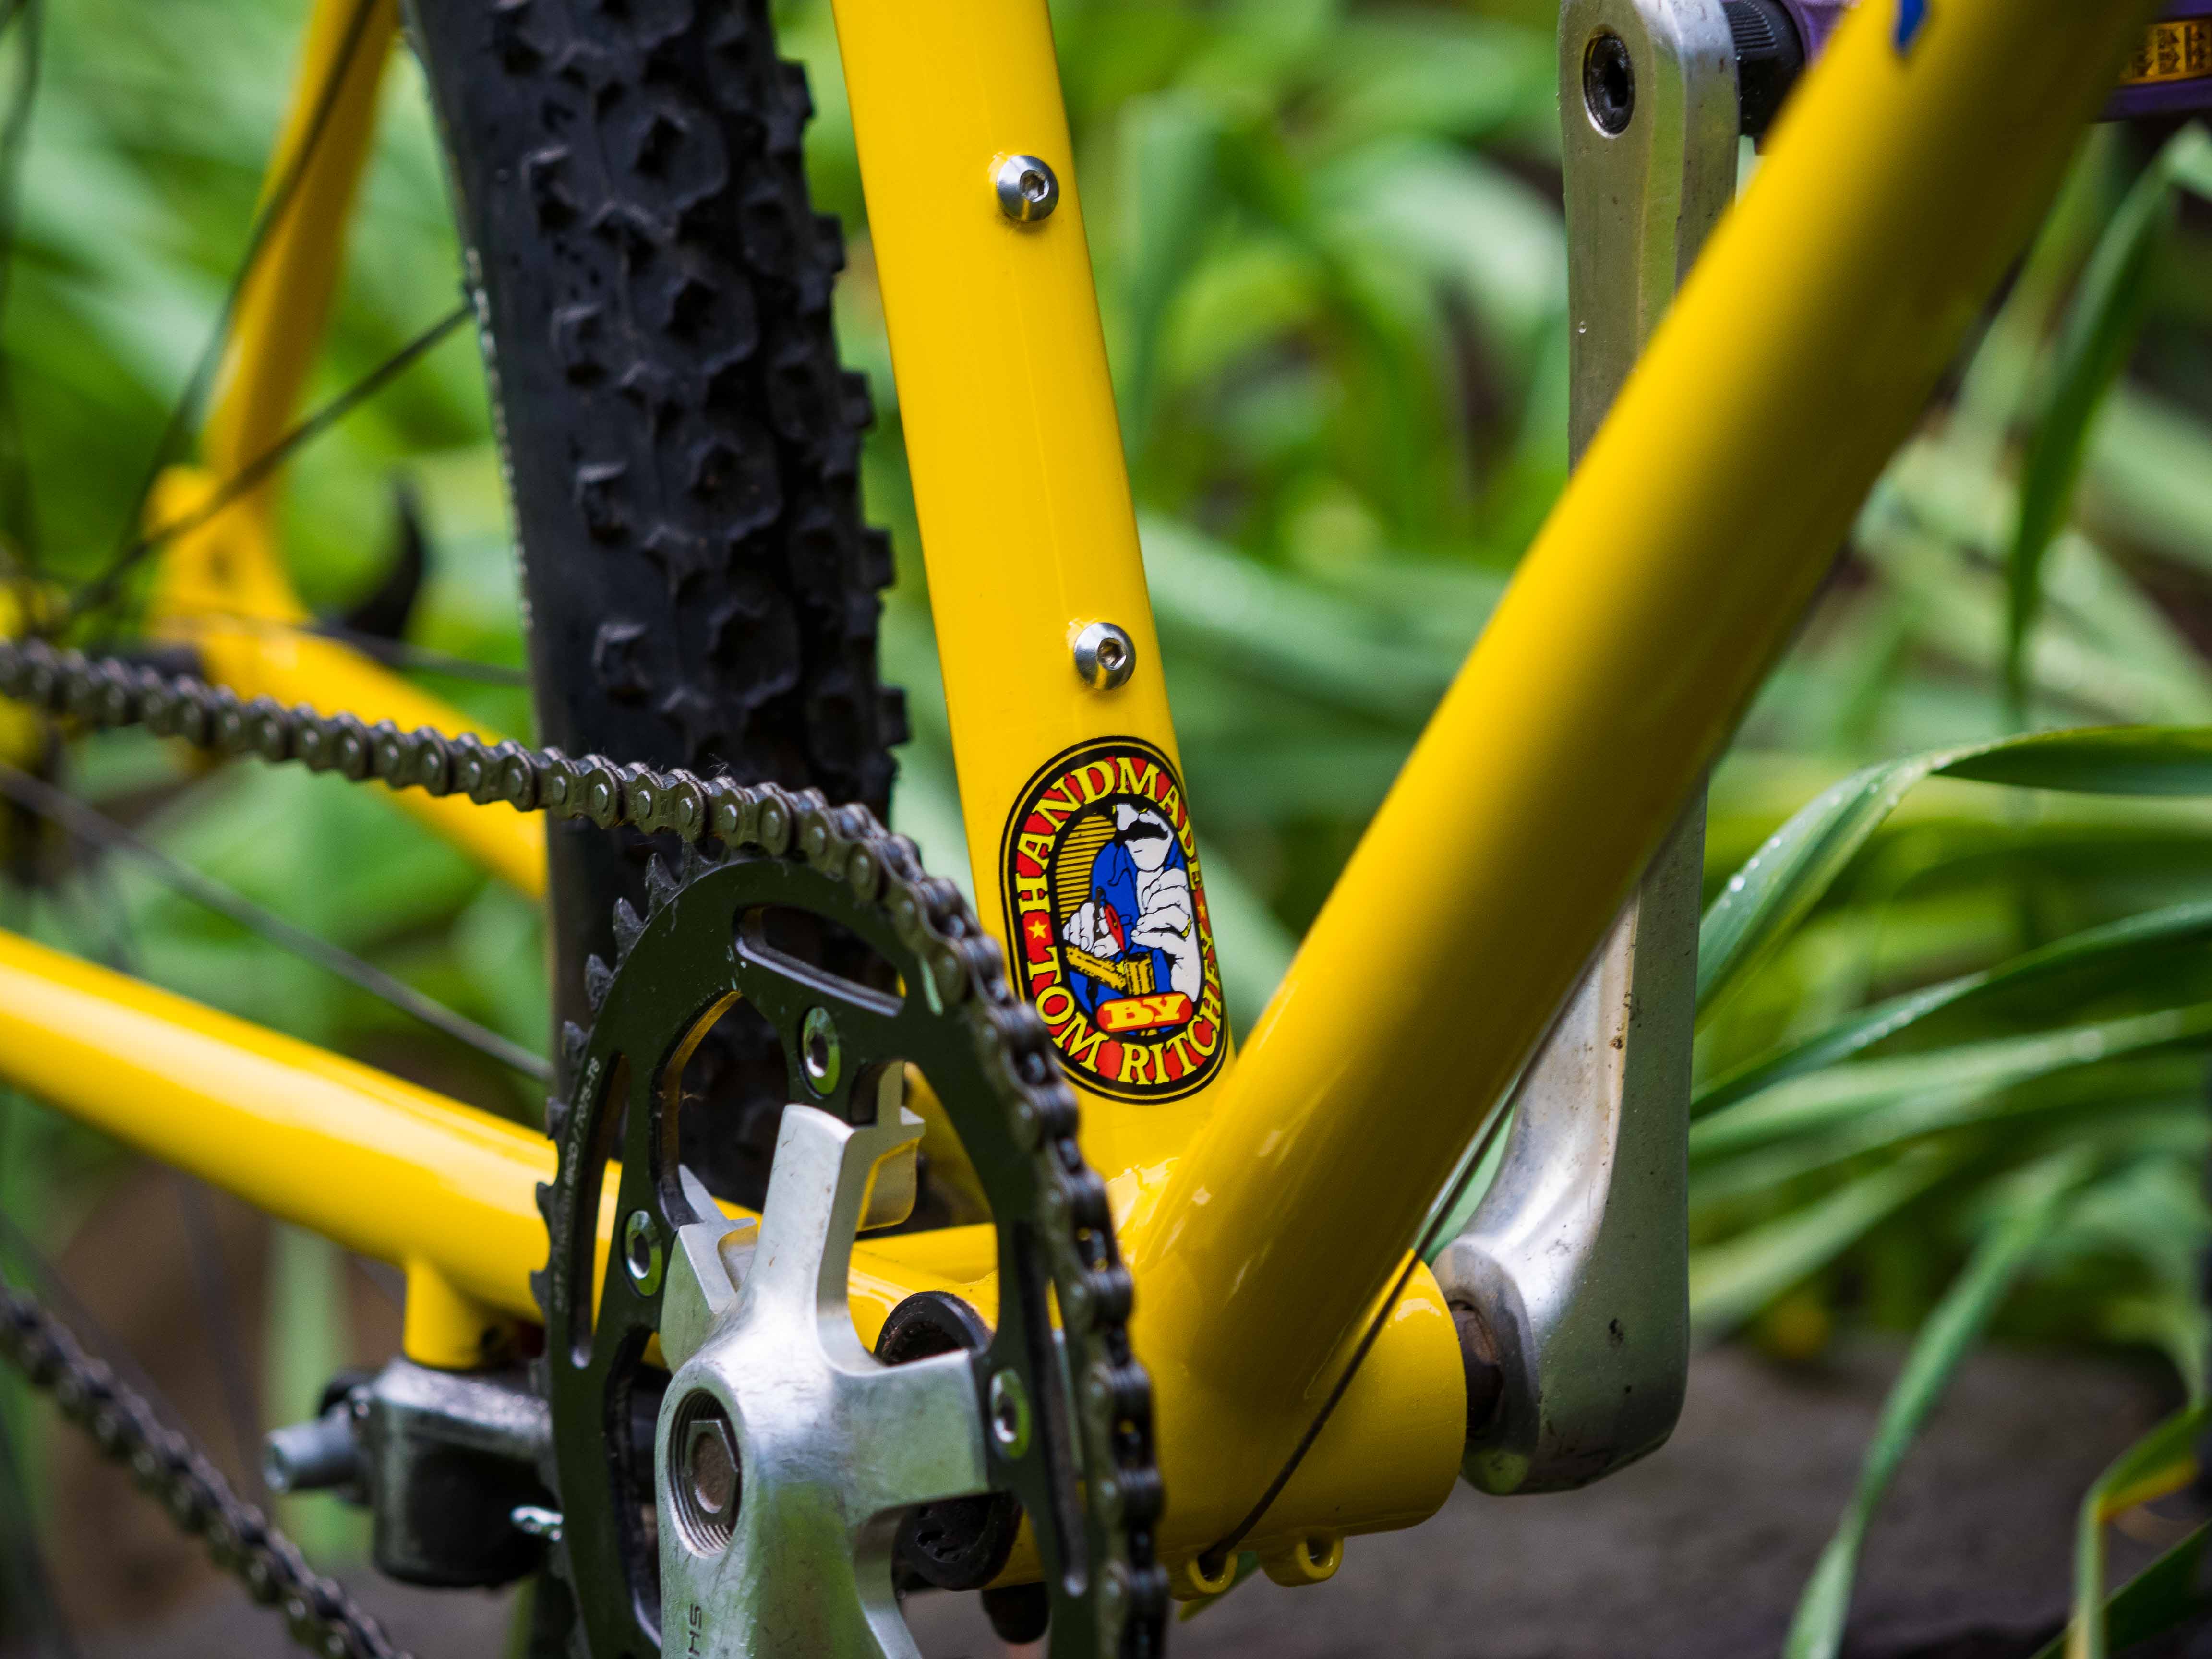 ritchey outback yellow